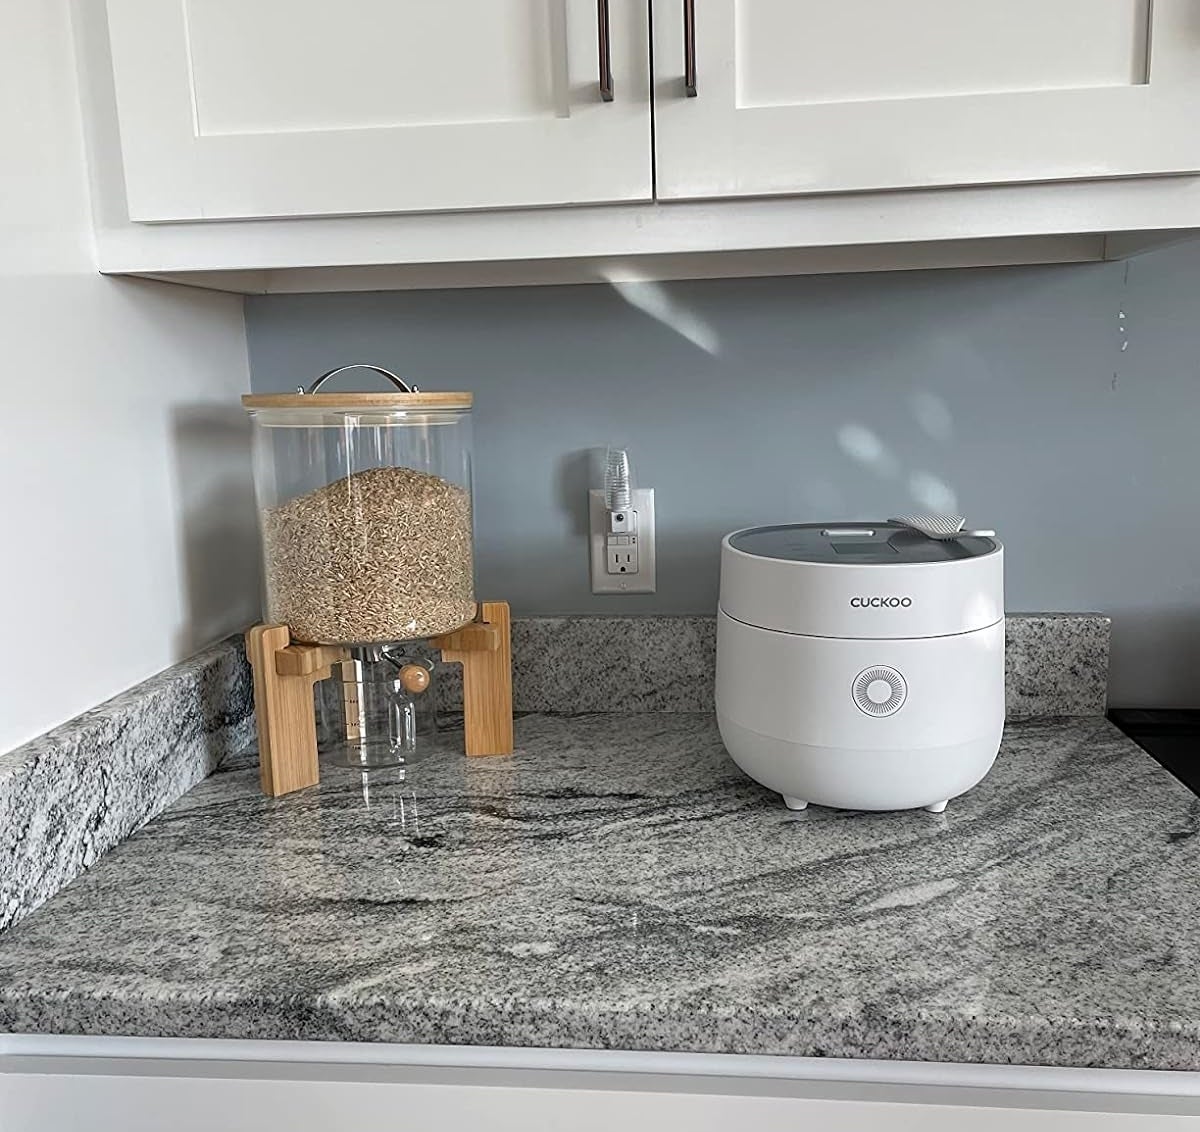 A rice dispenser and a Cuckoo rice cooker on a kitchen counter for efficient food prep